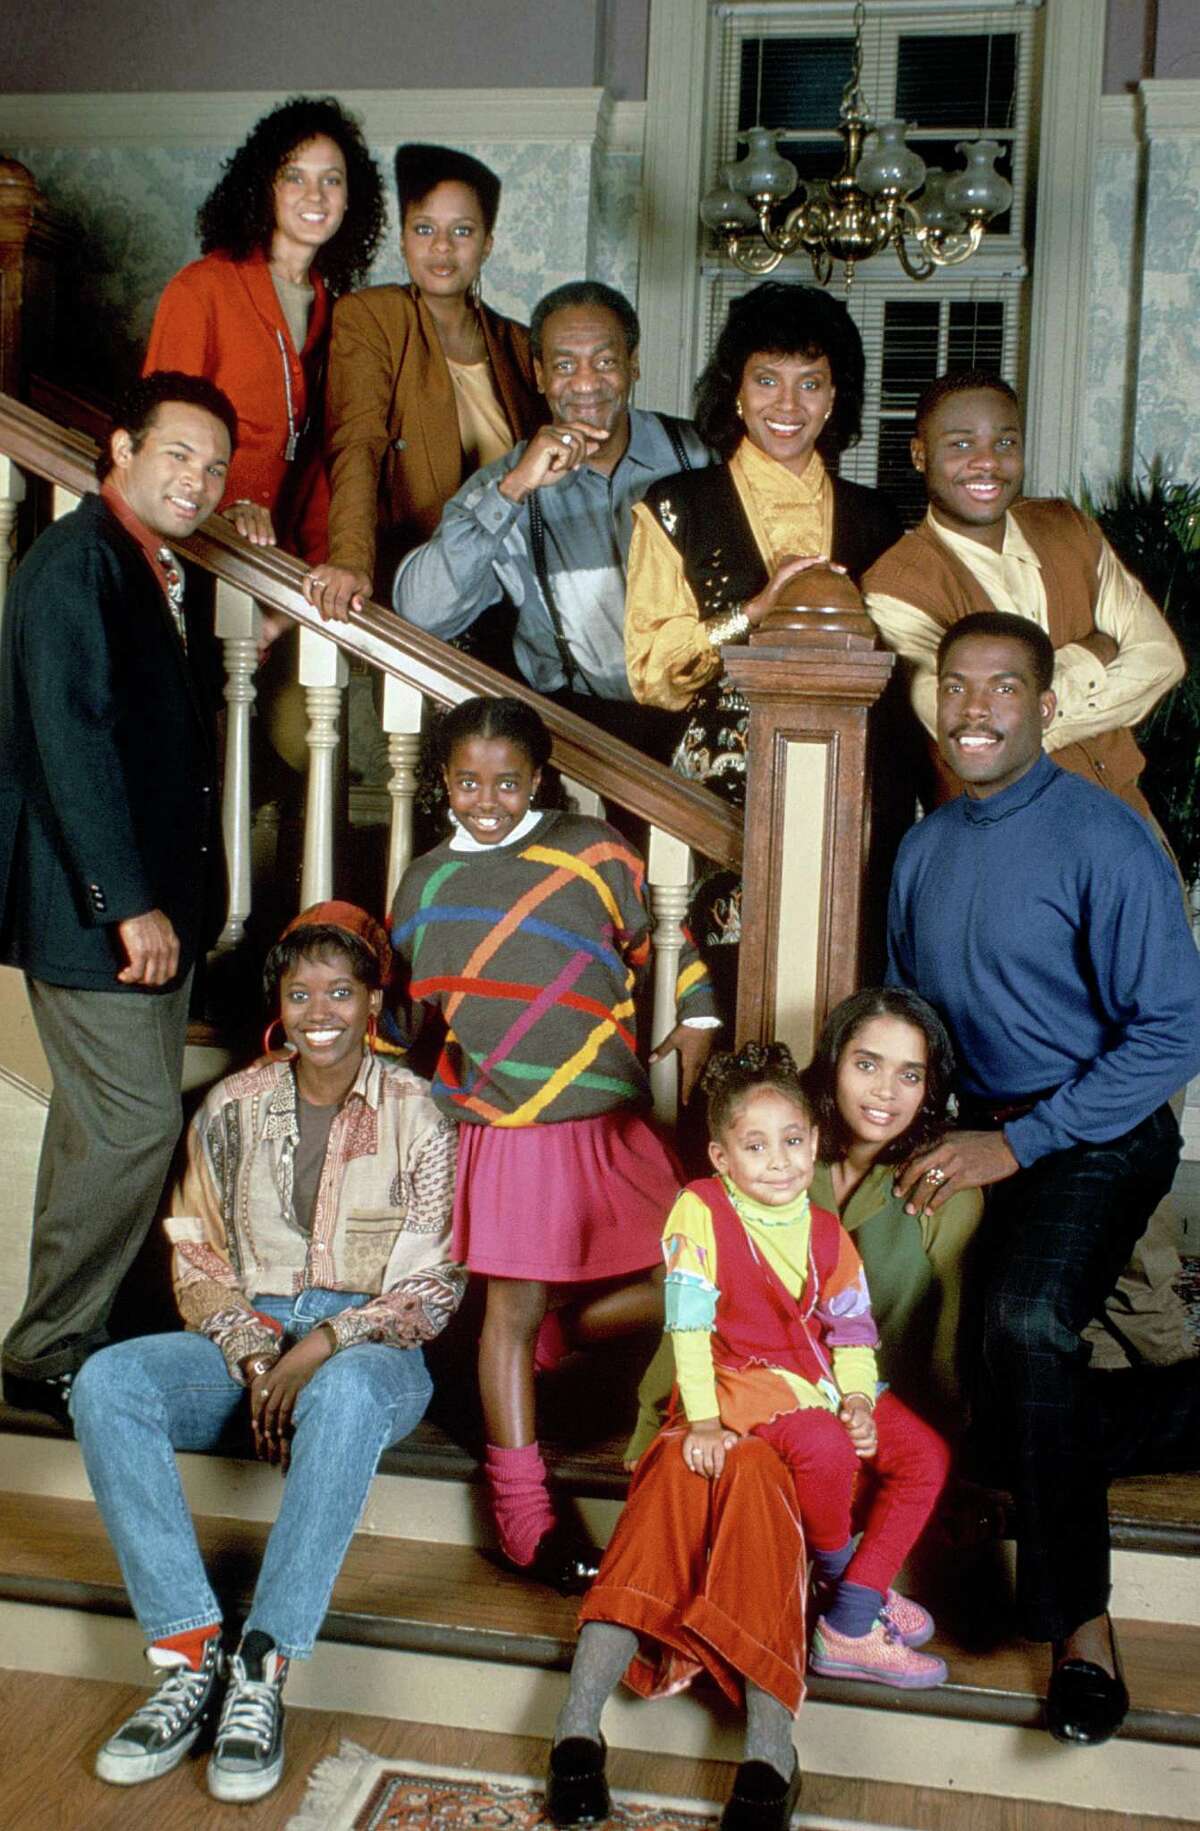 "The Cosby Show" was among America's favorite sitcoms in the 1980s and endures as a classic, but now show alum Malcolm-Jamal Warner says the series' legacy is "tarnished" by the sexual assault allegations made against Bill Cosby.